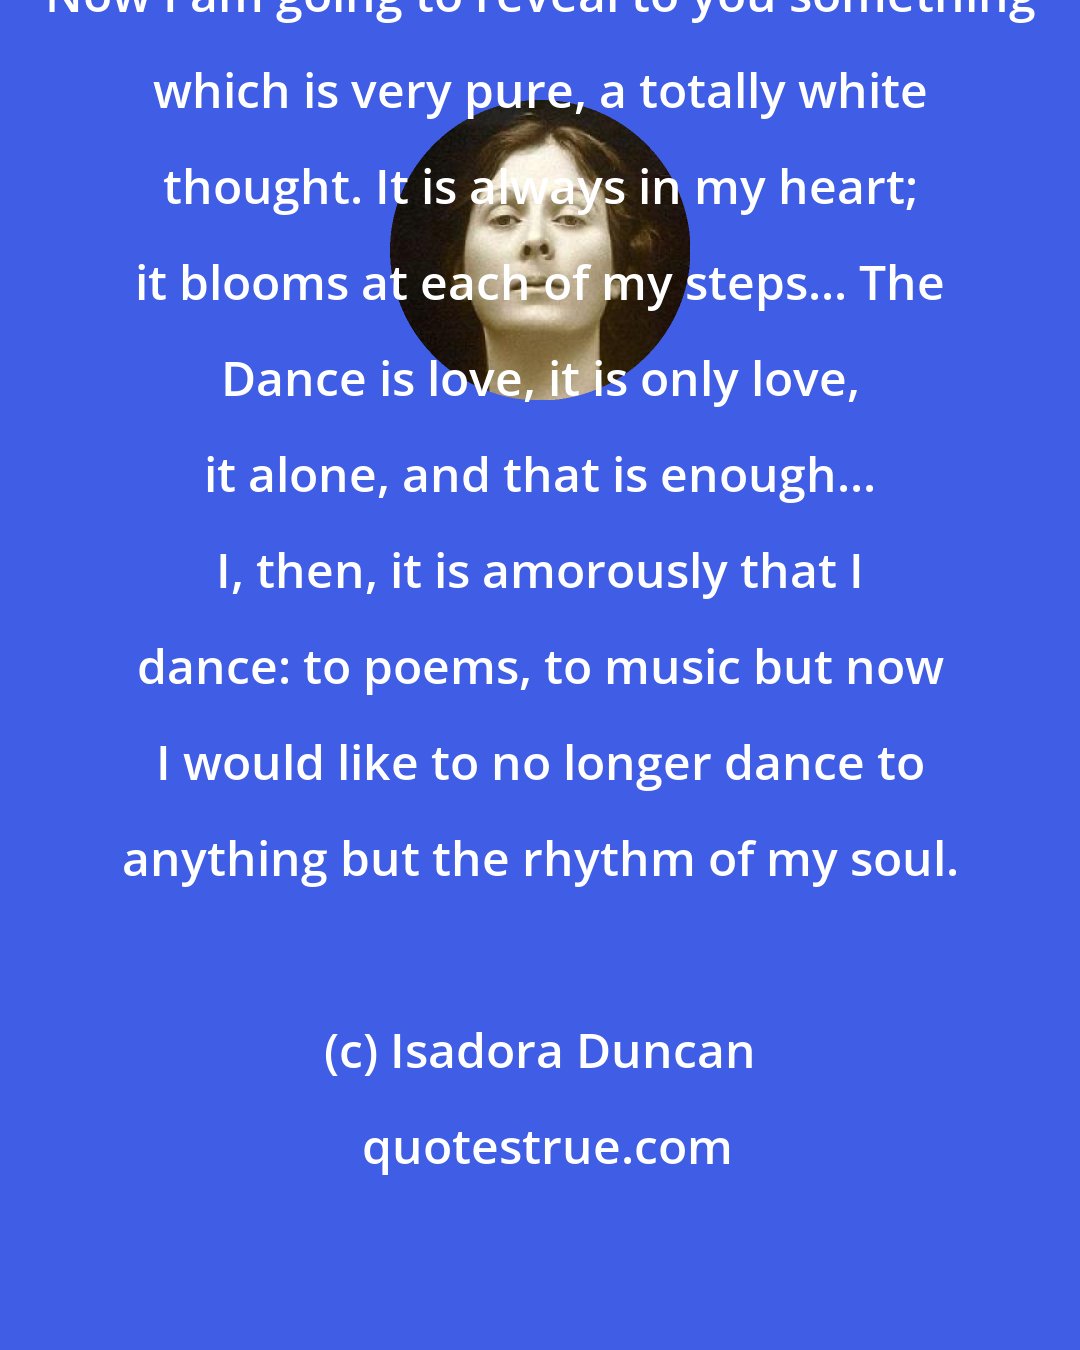 Isadora Duncan: Now I am going to reveal to you something which is very pure, a totally white thought. It is always in my heart; it blooms at each of my steps... The Dance is love, it is only love, it alone, and that is enough... I, then, it is amorously that I dance: to poems, to music but now I would like to no longer dance to anything but the rhythm of my soul.